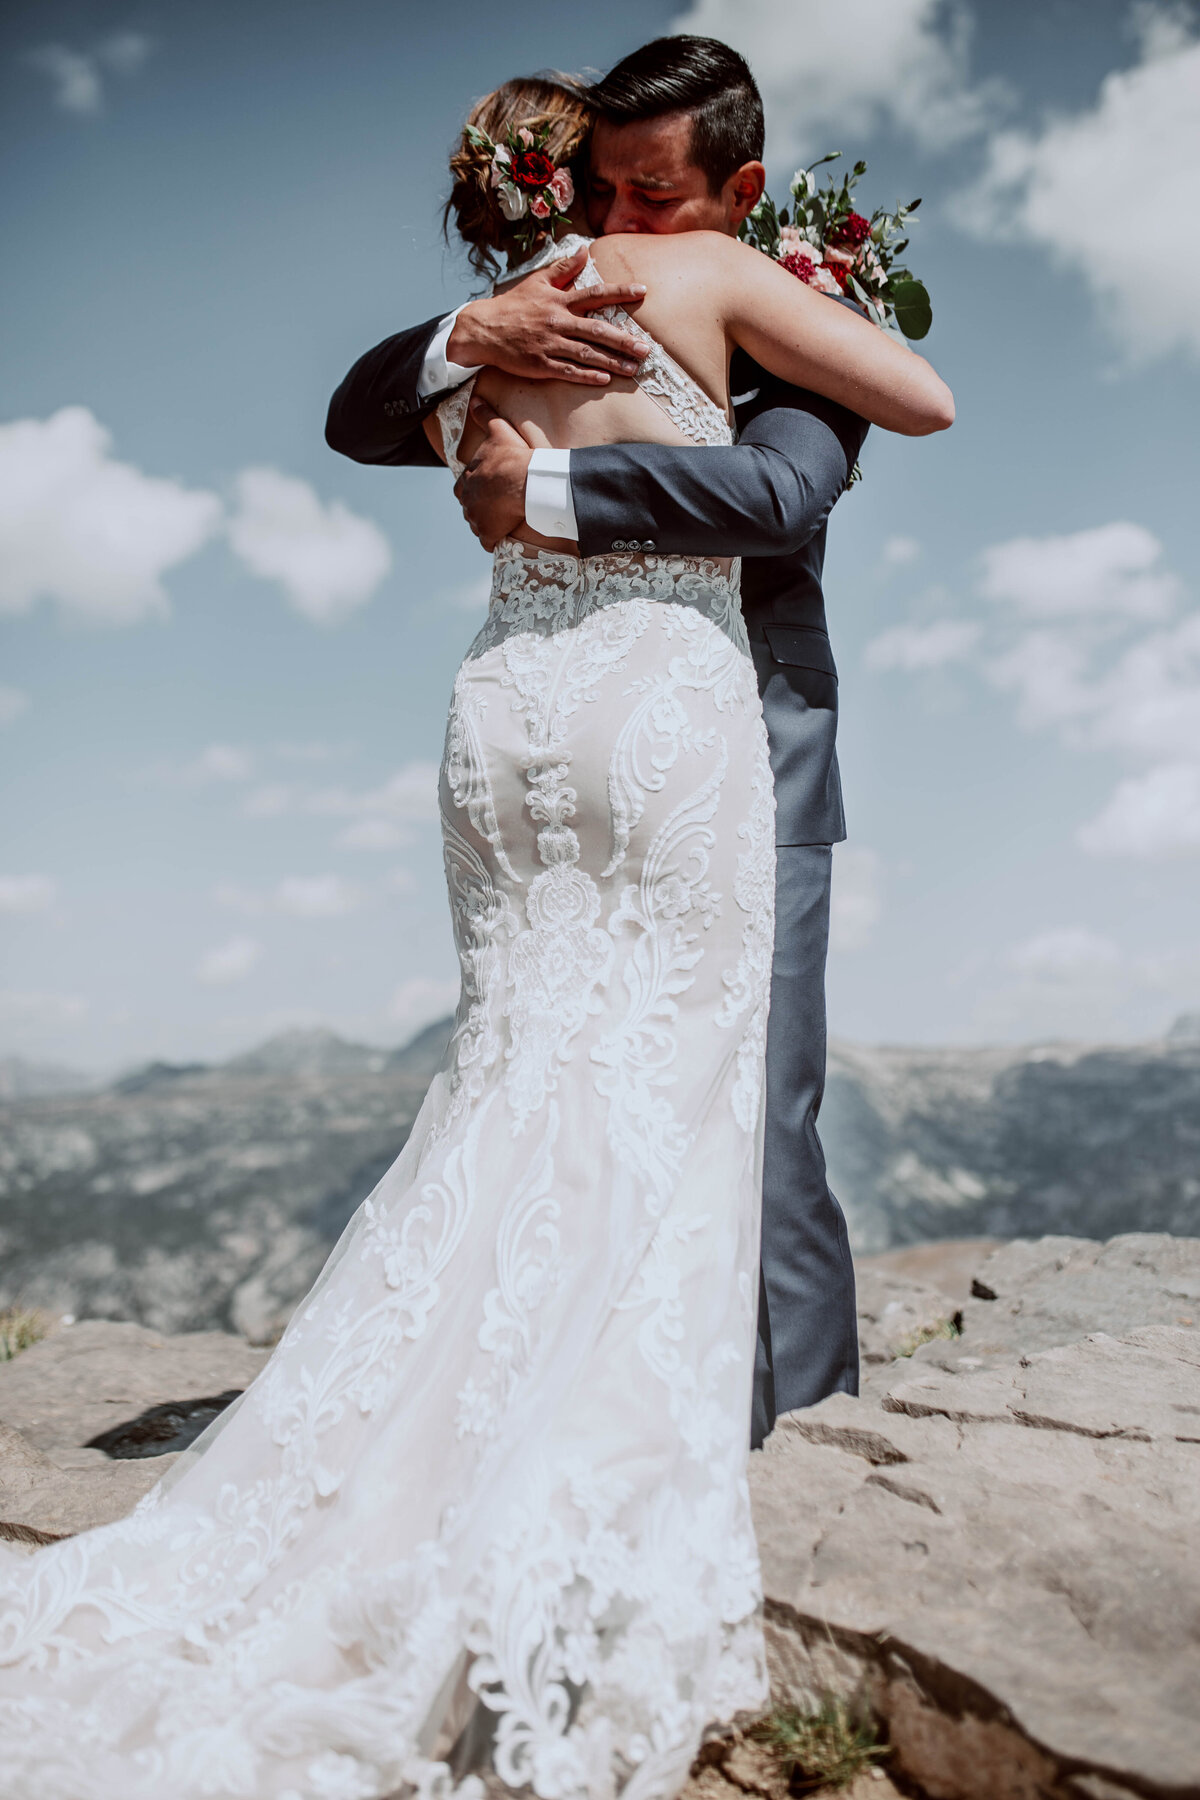 Idaho Falls wedding photographer documents bridea lace wedding dress as she stands on the mountain in the Tetons with her groom